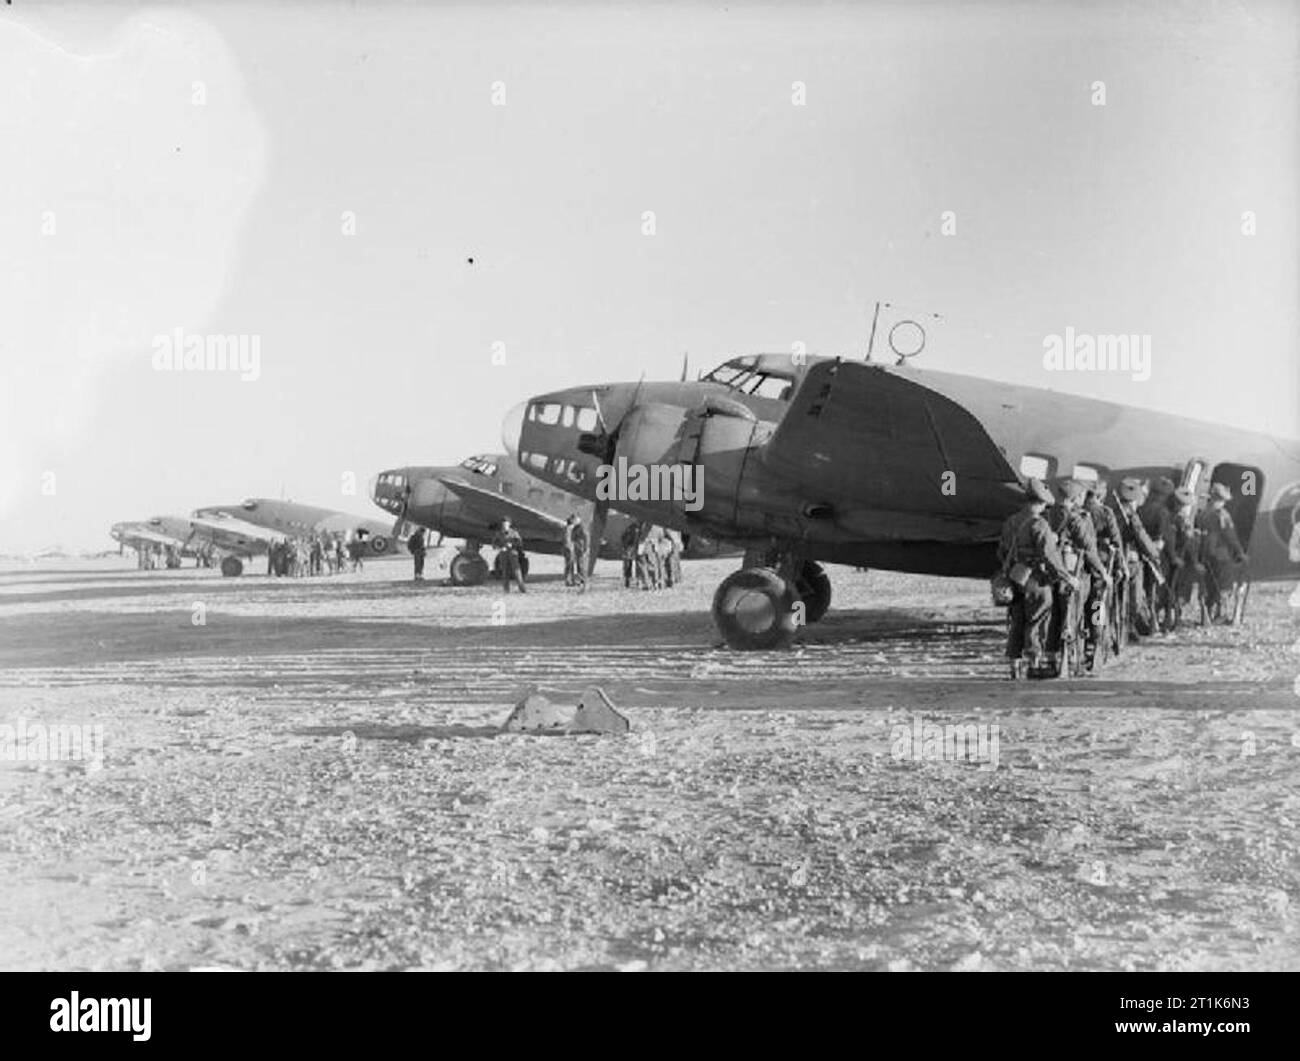 Royal Air Force Operations in the Middle East and North Africa, 1939-1943. Soldiers of 5th Battalion the Seaforth Highlanders board Hawker Hudson Mark VIs of No. 267 Squadron RAF at LG 224/Cairo West, Egypt for an Operation HELPFUL flight carrying troops to Castel Benito, Libya. Stock Photo